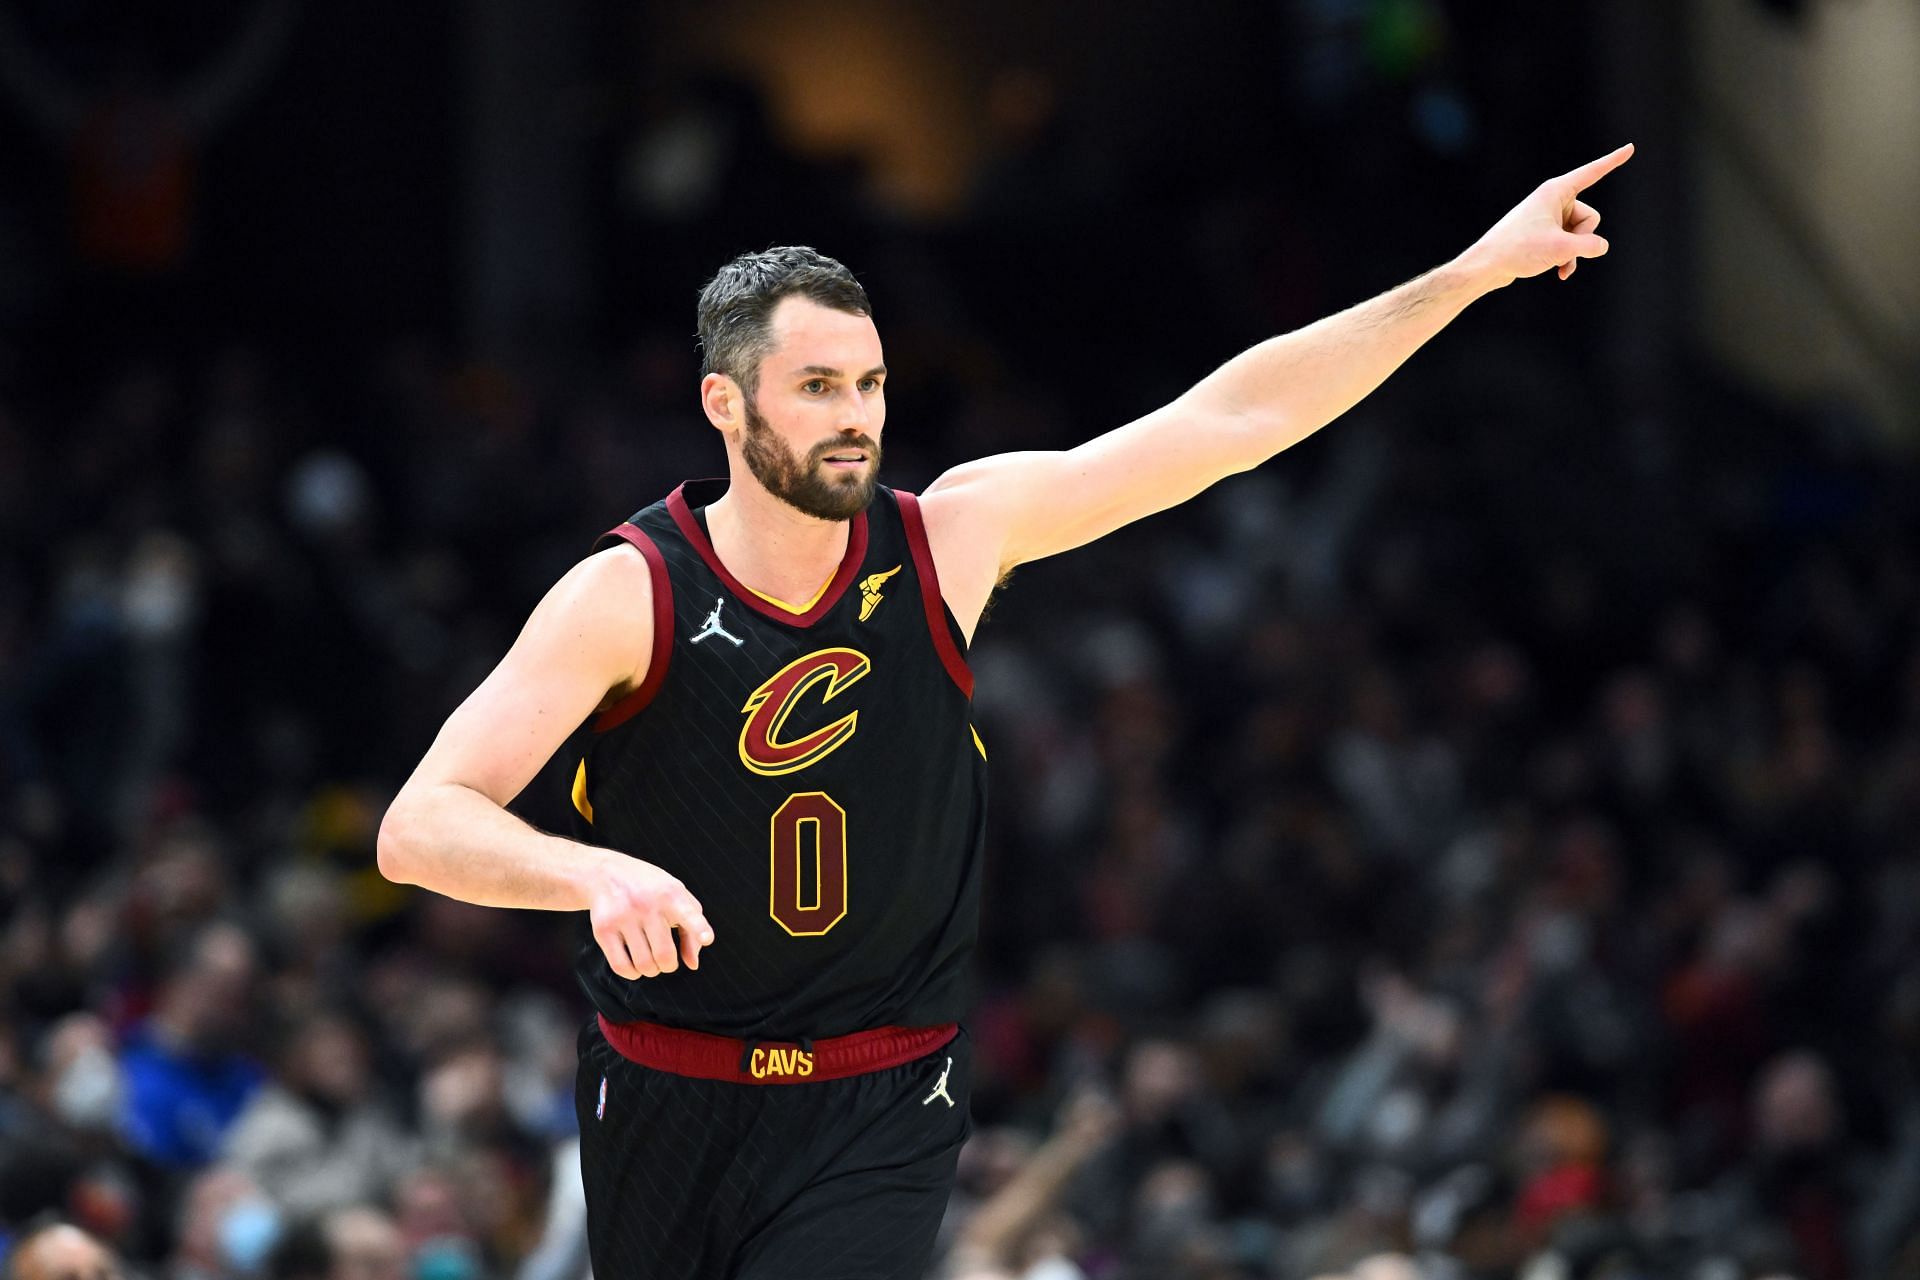 Cleveland Cavaliers forward Kevin Love has entered the Sixth Man of the Year conversation.